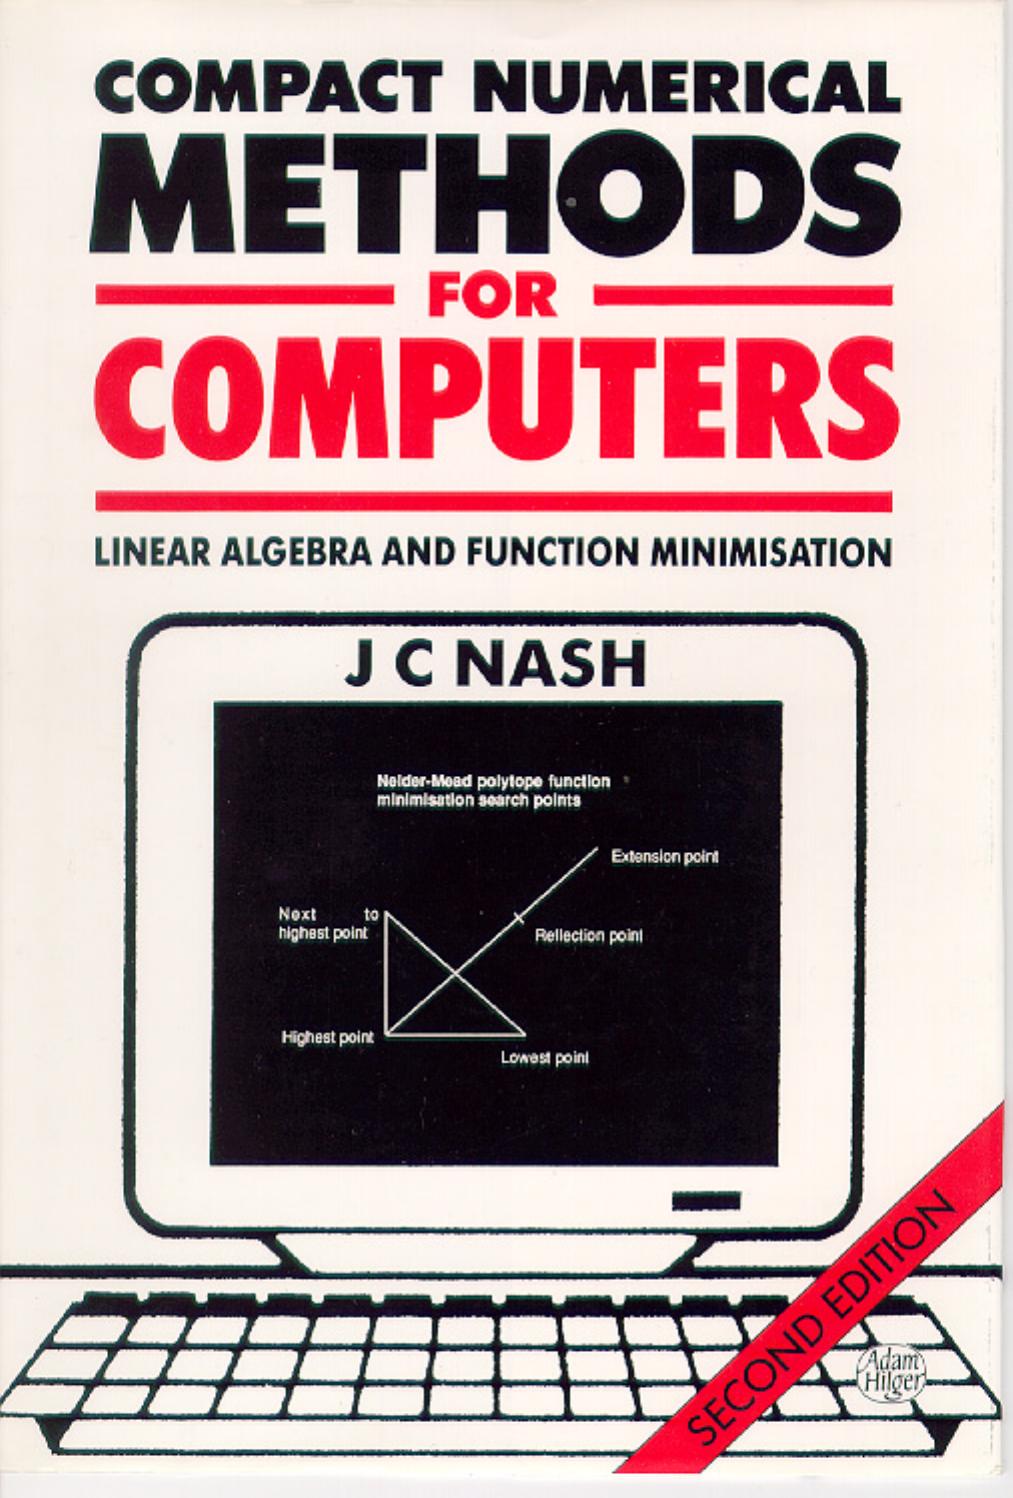 Compact Numerical Methods for Computers Linear Algebra and Function Minimisation 2Ed